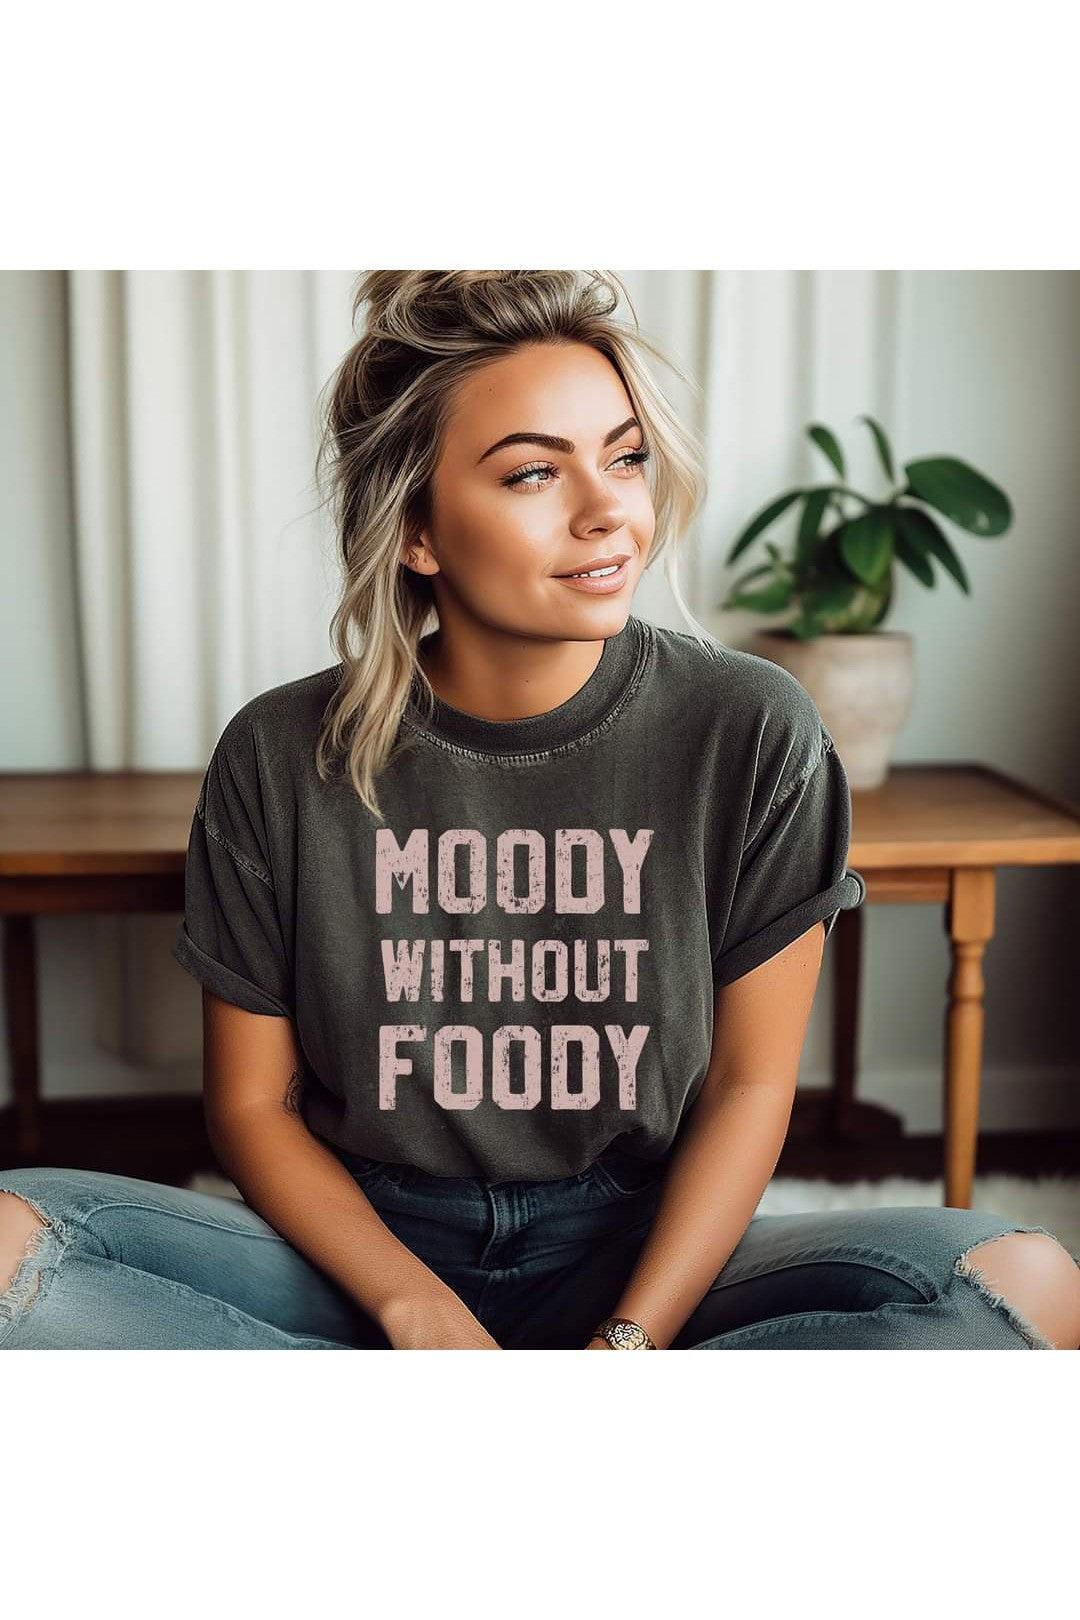 Moody without Foody Graphic Tee-Graphic Tee-Revive Boutique & Floral-Small-Revive Boutique